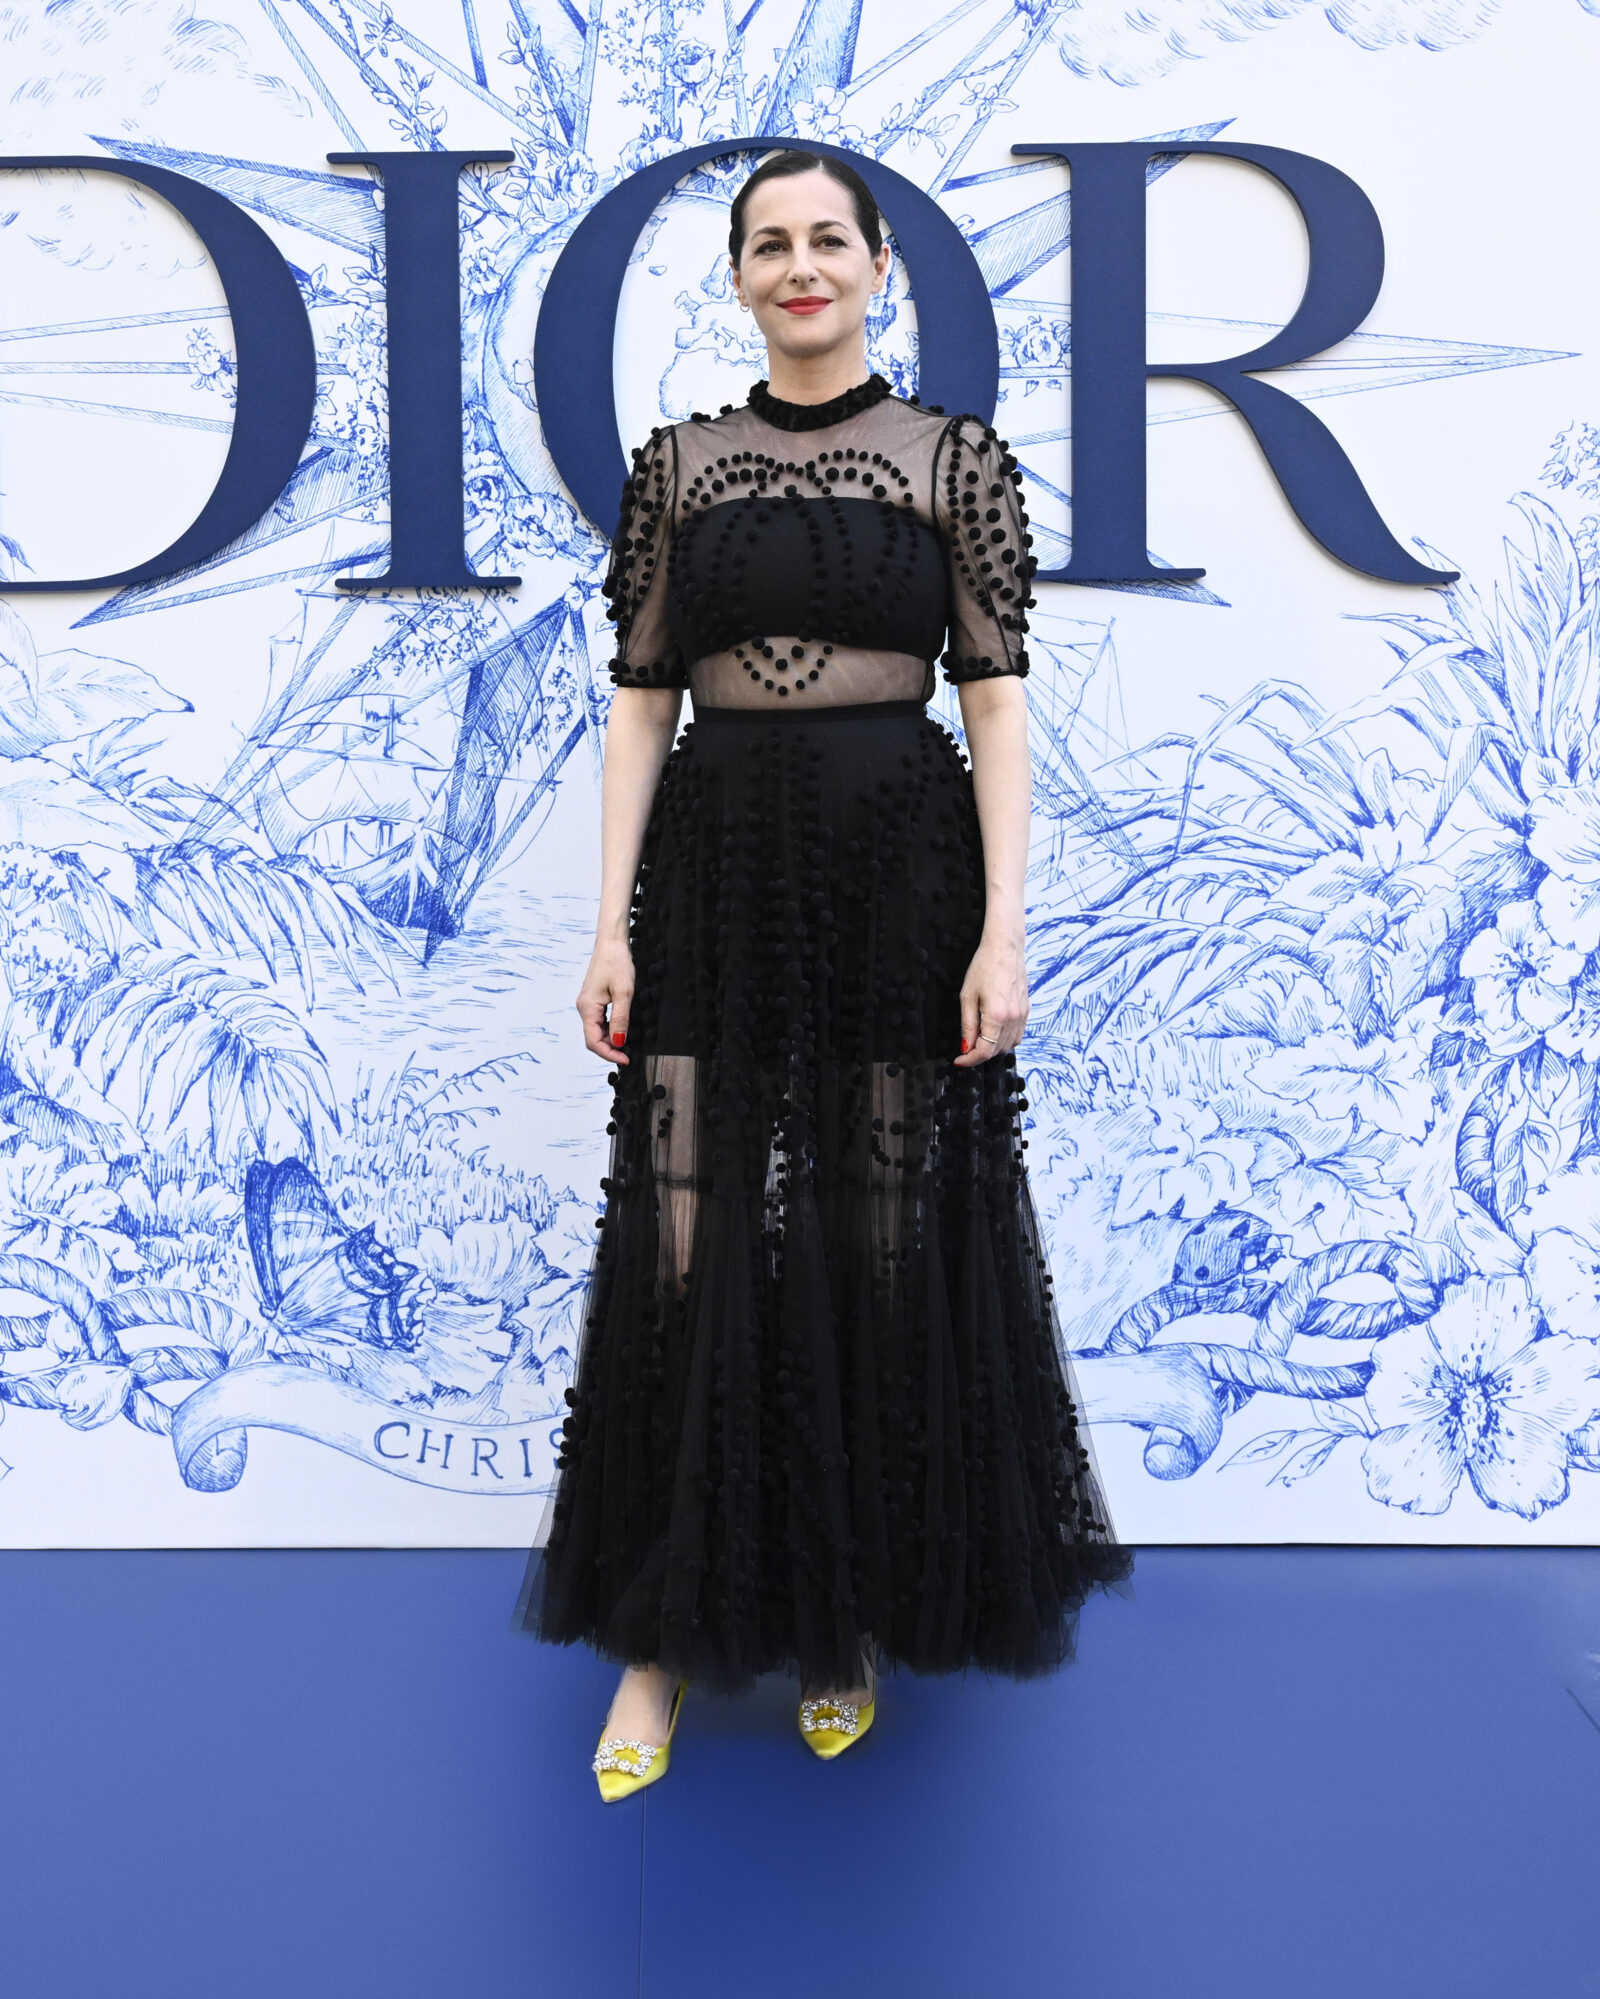 SEVILLE, SPAIN - JUNE 16: Amira Casar attends &quot;Crucero Collection&quot; fashion show presentation by Dior at Plaza de España on June 16, 2022 in Seville, Spain. (Photo by Carlos Alvarez/Getty Images for Dior)